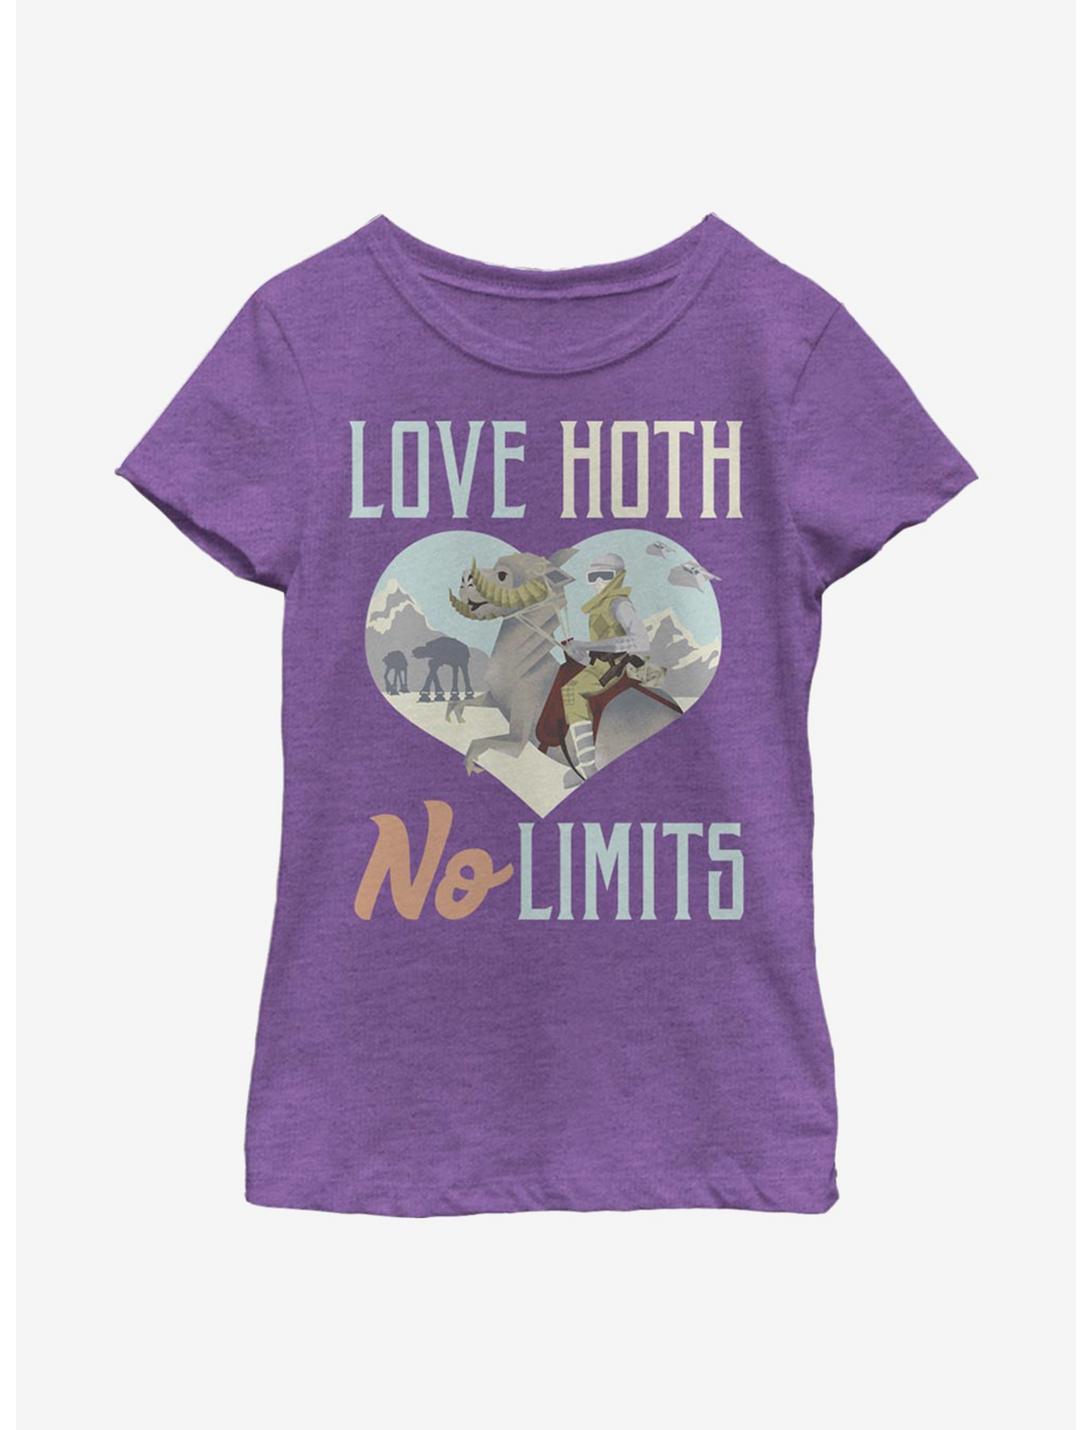 Star Wars Hoth Love Youth Girls T-Shirt, PURPLE BERRY, hi-res